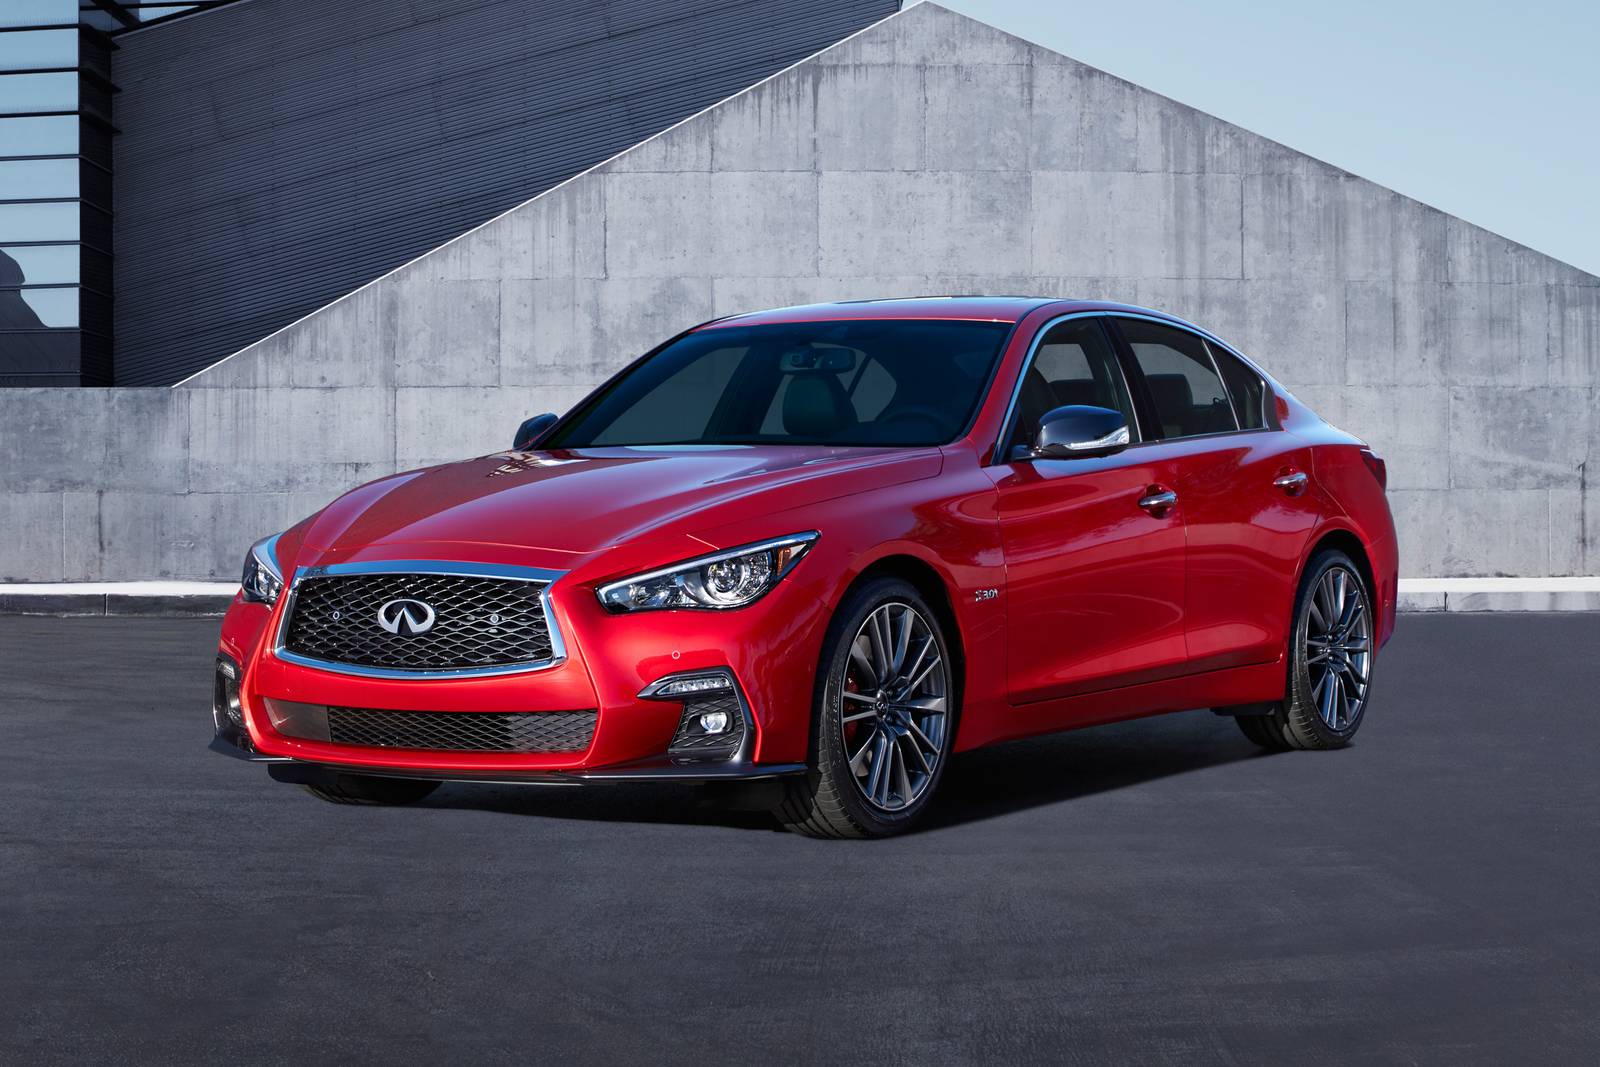 Used 2021 INFINITI Q50 RED SPORT 400 Review | Edmunds